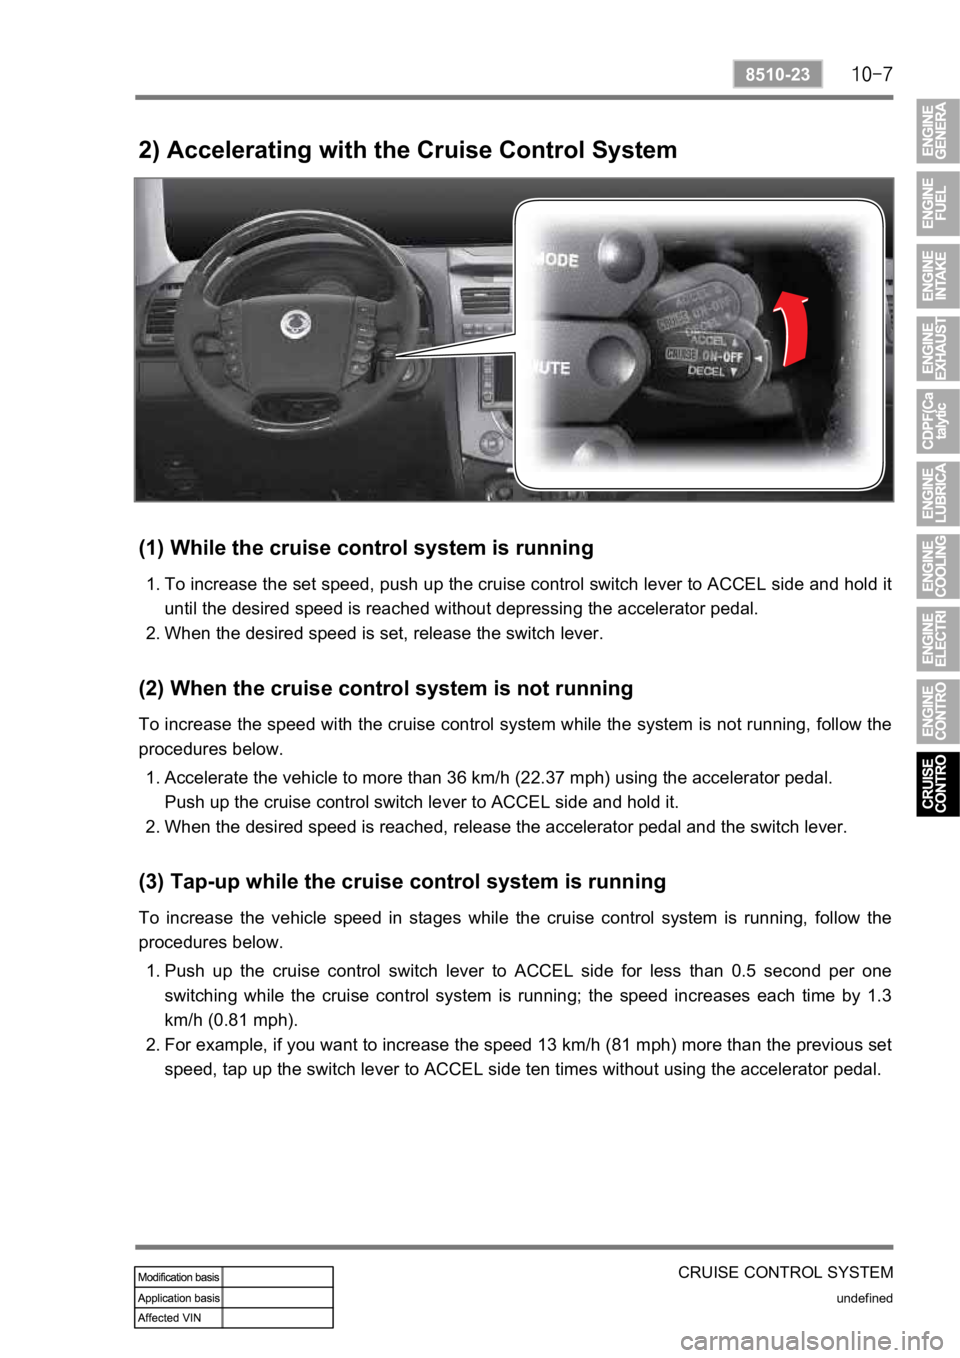 SSANGYONG REXTON 2008  Service Manual CRUISE CONTROL SYSTEM
undefined
8510-23
2) Accelerating with the Cruise Control System
(1) While the cruise control system is running
To increase the set speed, push up the cruise control switch lever